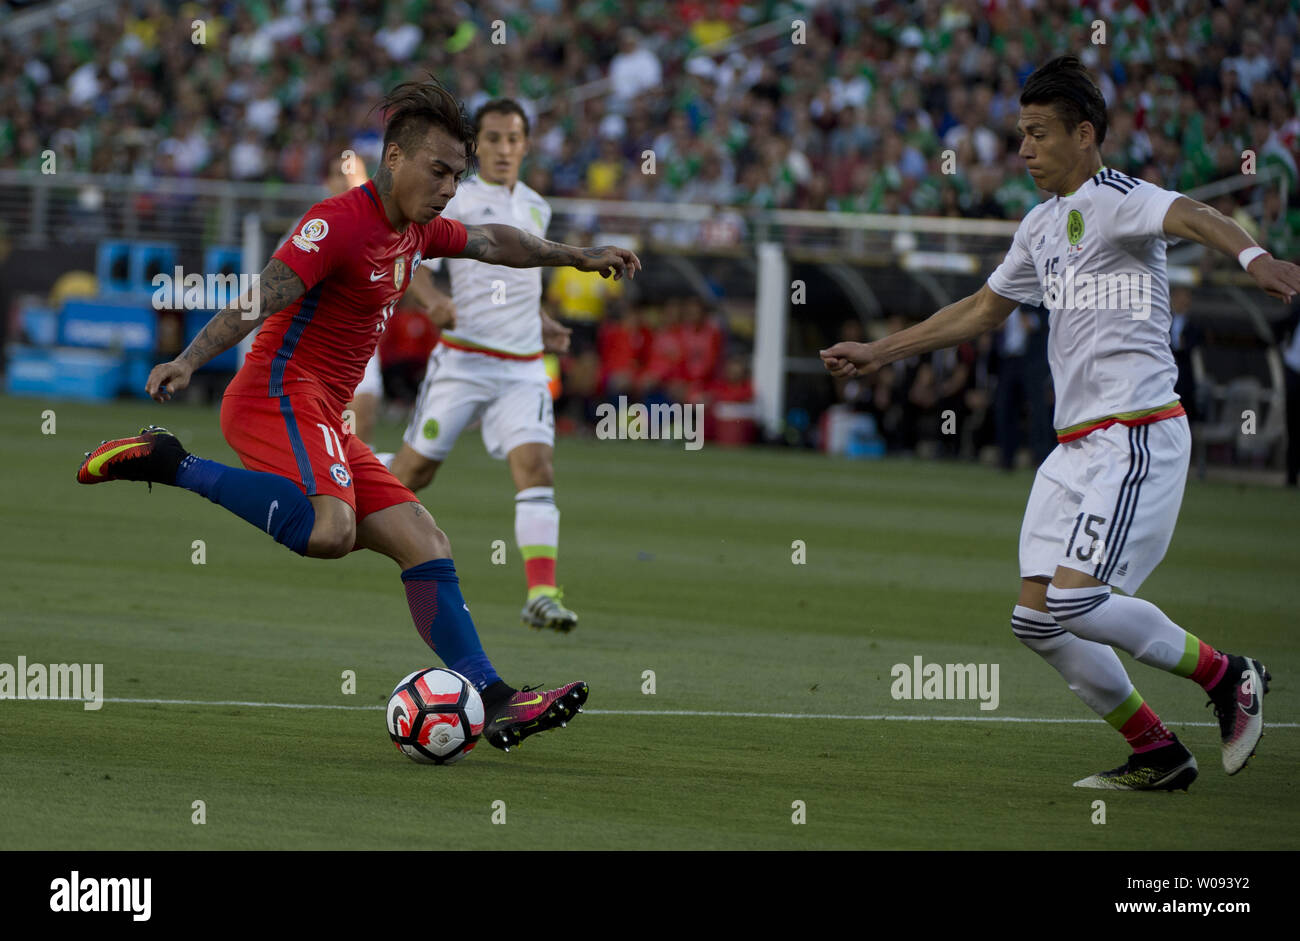 Chile's Eduardo Vargas (11) moves the ball against Mexico's Hector Moreno (15) in the first half as a Mexico fan covers her face at COPA America Centenario quarter-finals at Levi's Stadium in Santa Clara, California on June 18,  2016. Vargas had four goals as Chile annihilated Mexico 7-0.   Photo by Terry Schmitt/UPI Stock Photo